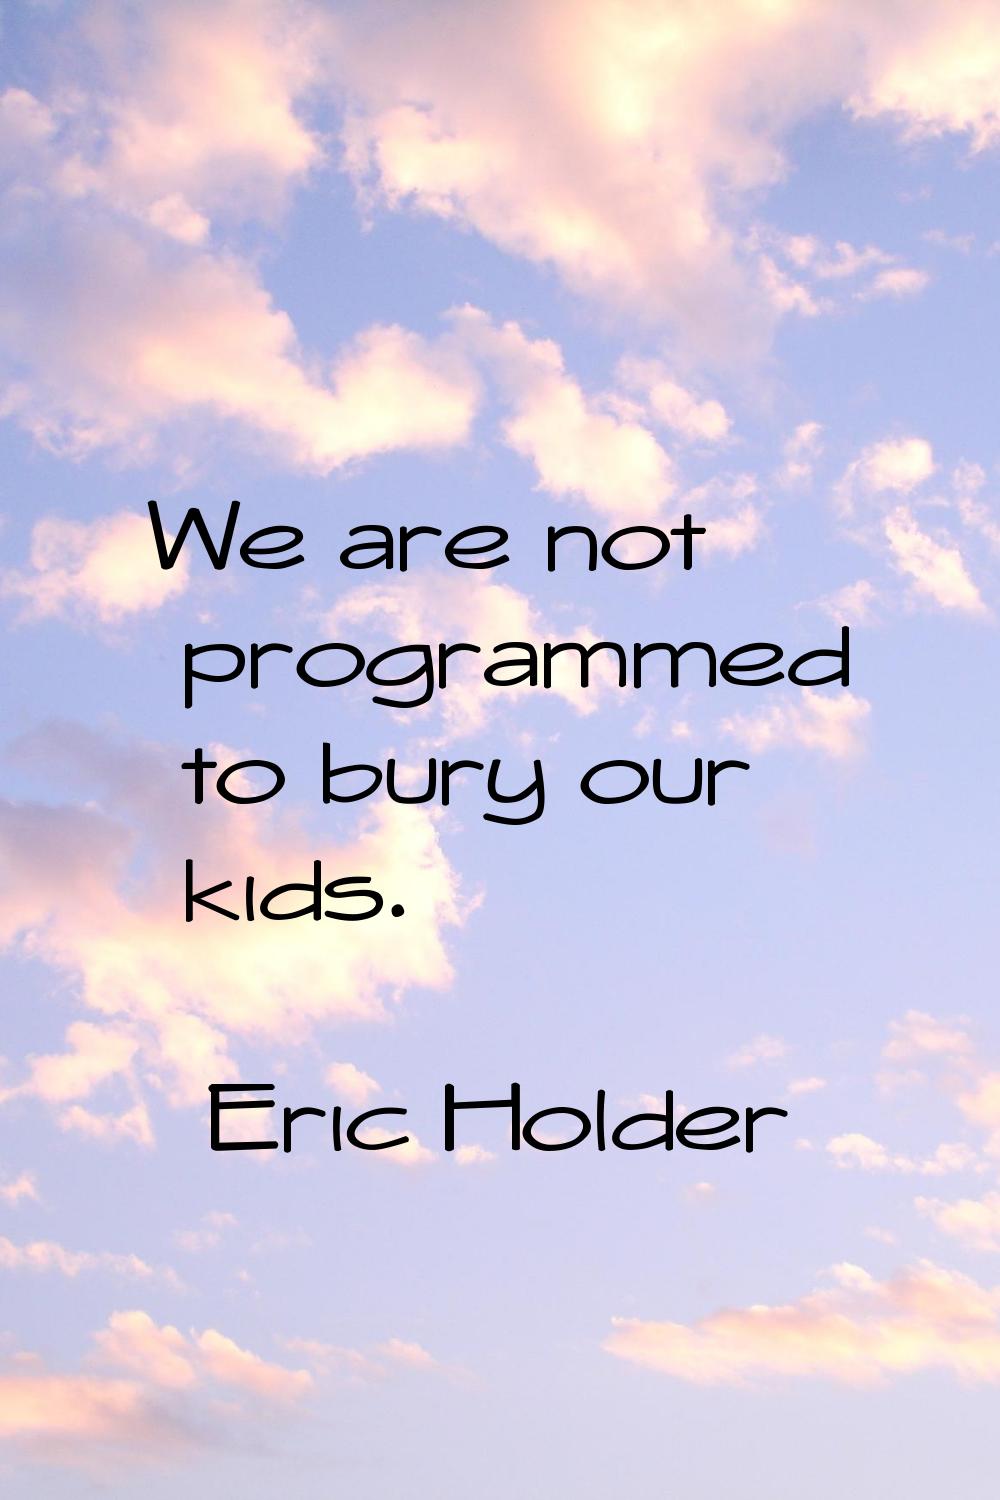 We are not programmed to bury our kids.